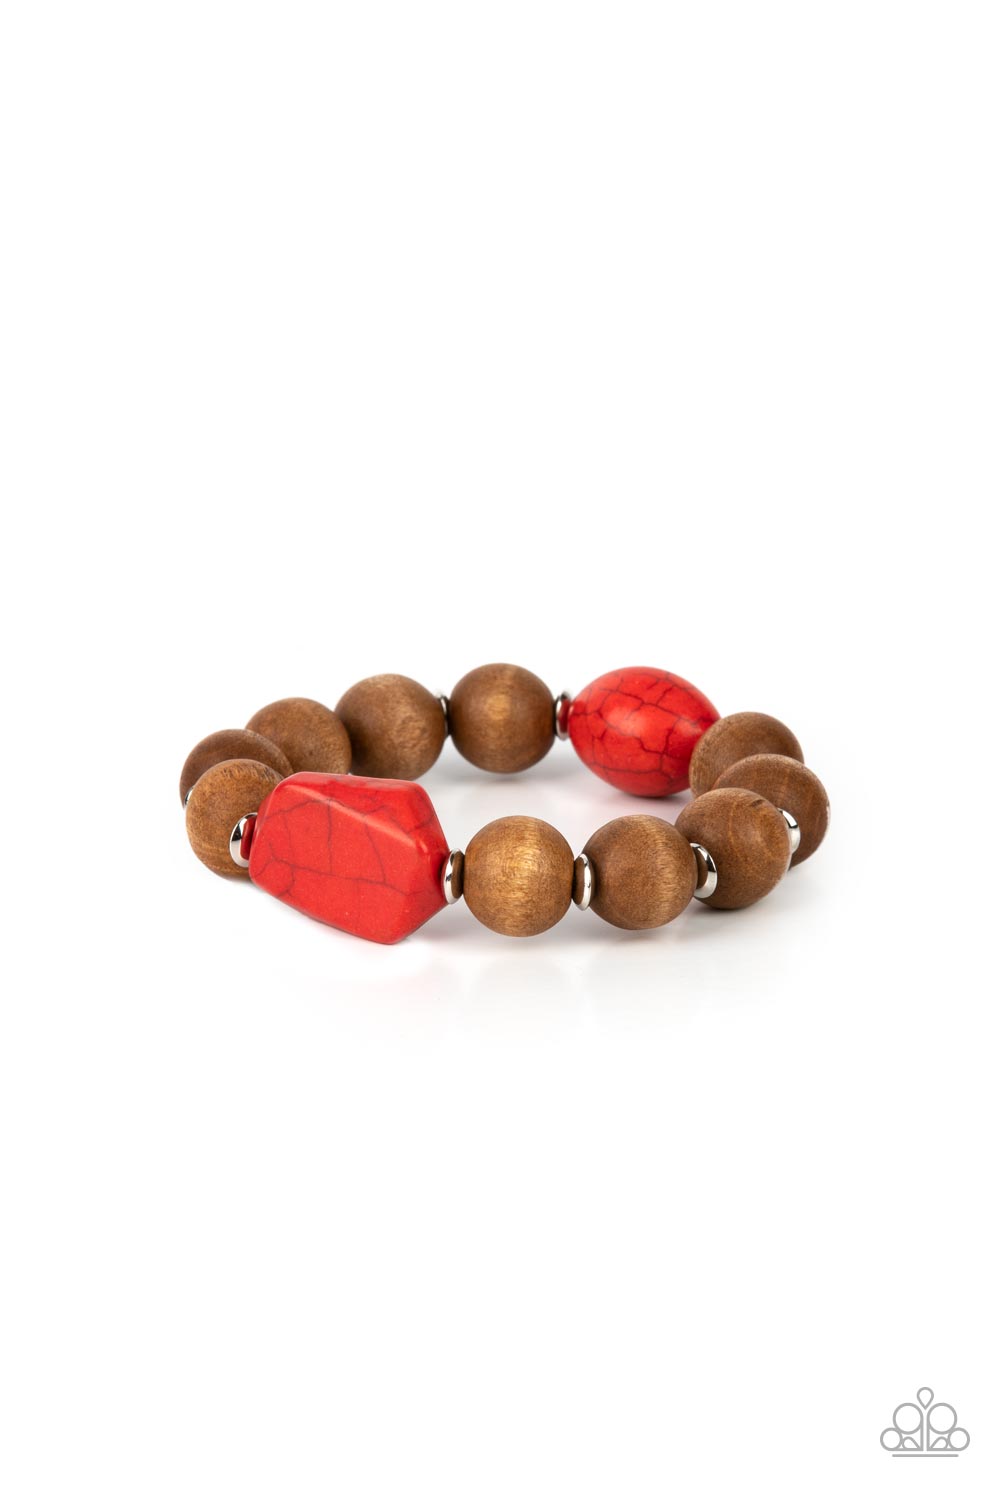 Oversized brown wooden beads and mismatched red stone accents are separated by dainty silver discs and threaded along a stretchy band